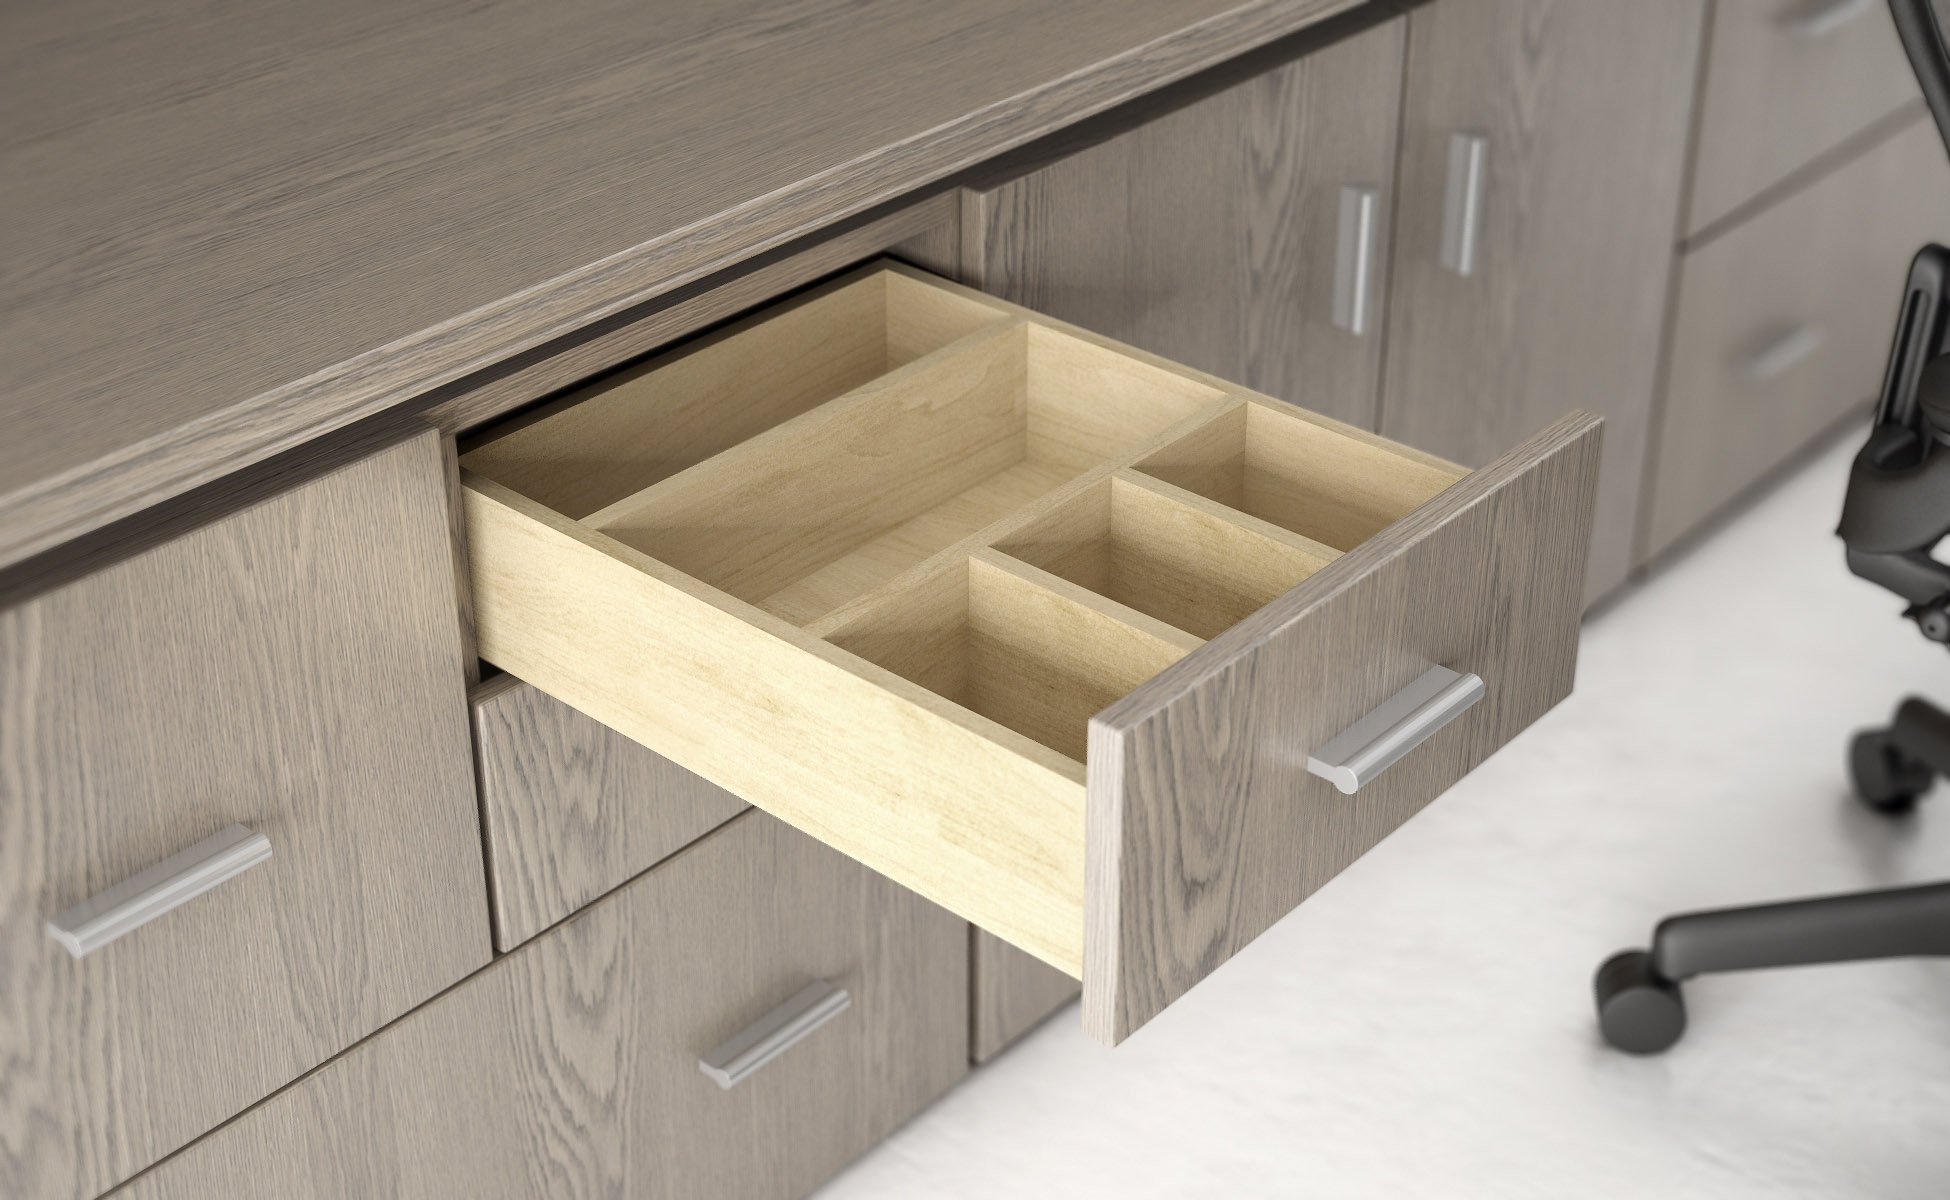 BUILT IN DRAWER DIVIDER IN WEATHERED OAK FINISH